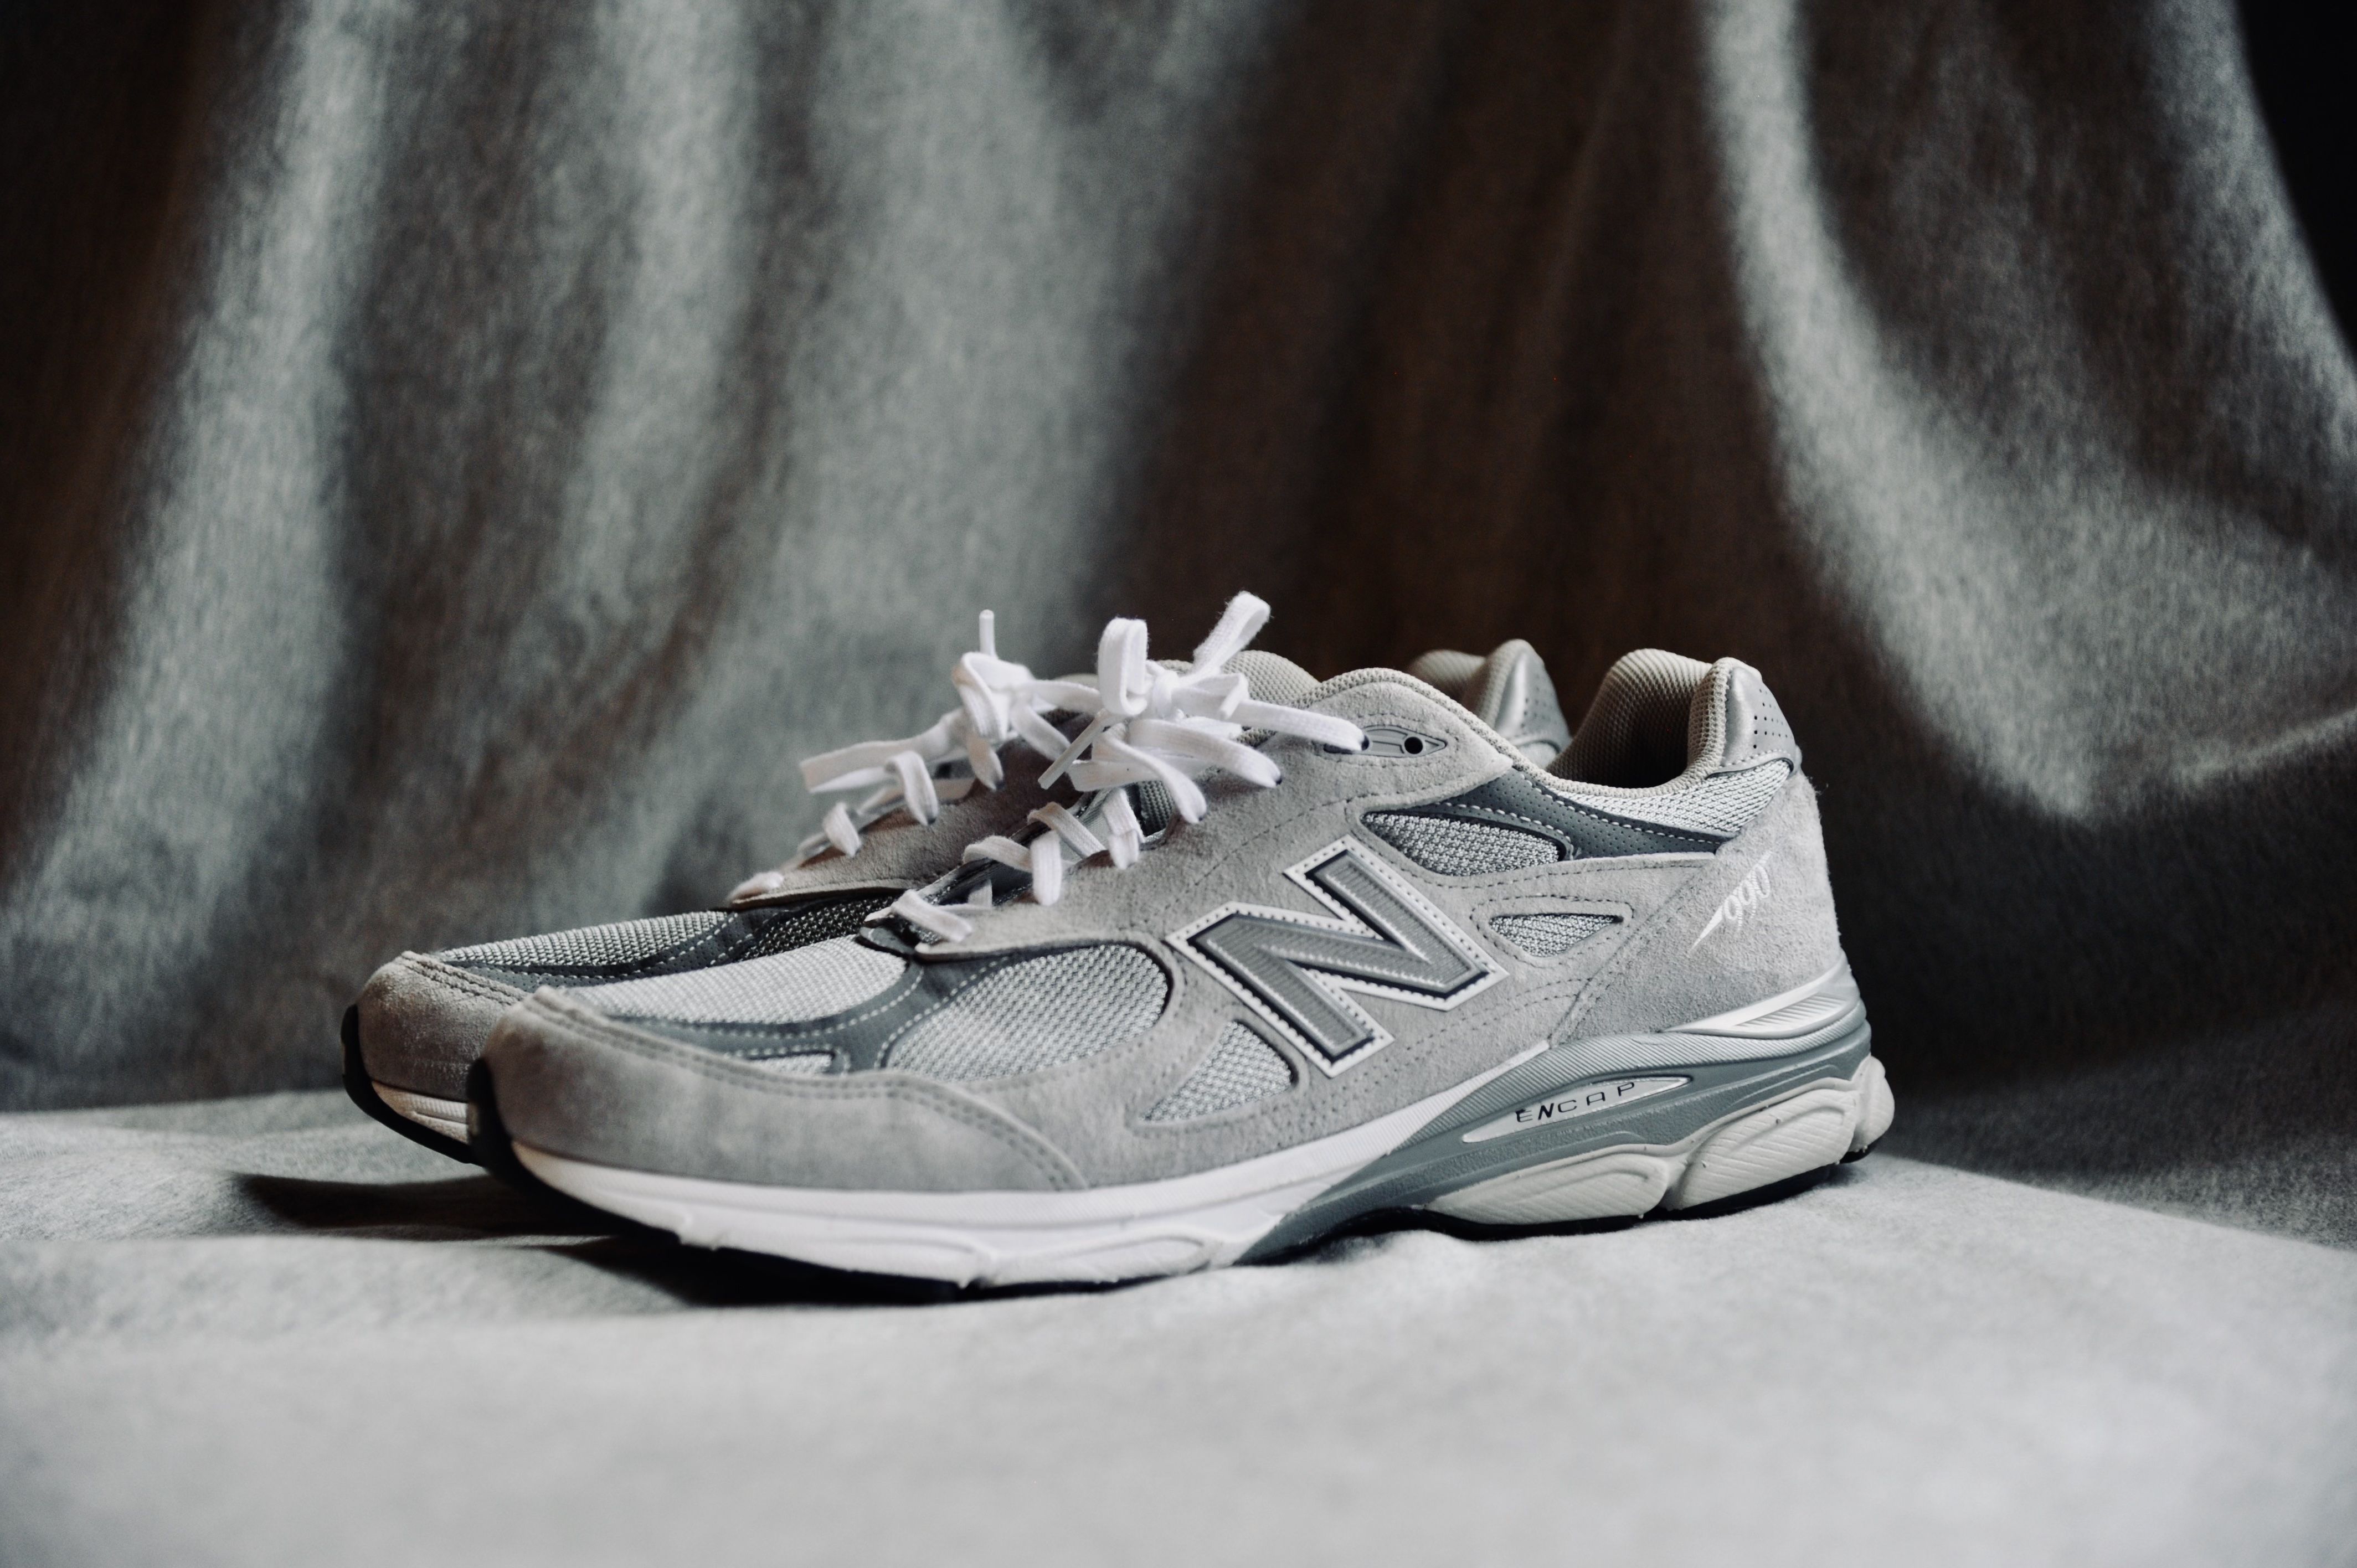 New Balance 990v3 Review: the Perfect Shoe for Sneakerhead Dads